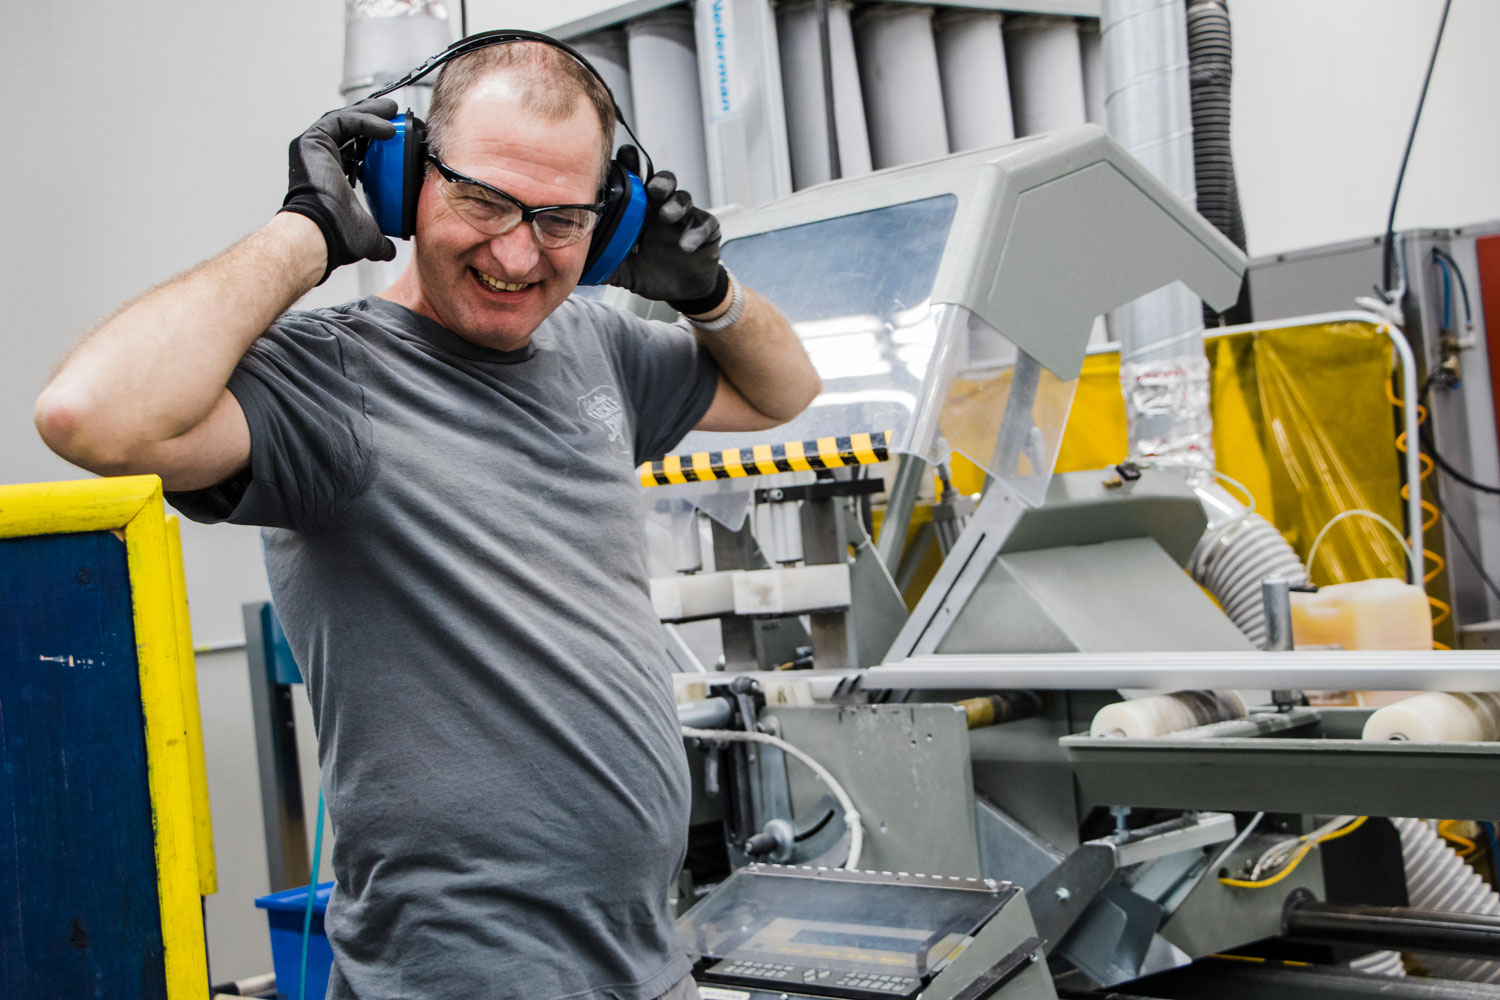 John Cashion, a light skinned man, is wearing large ear protection headphones, clear safety glasses, and is laughing while standing next to a large machine.